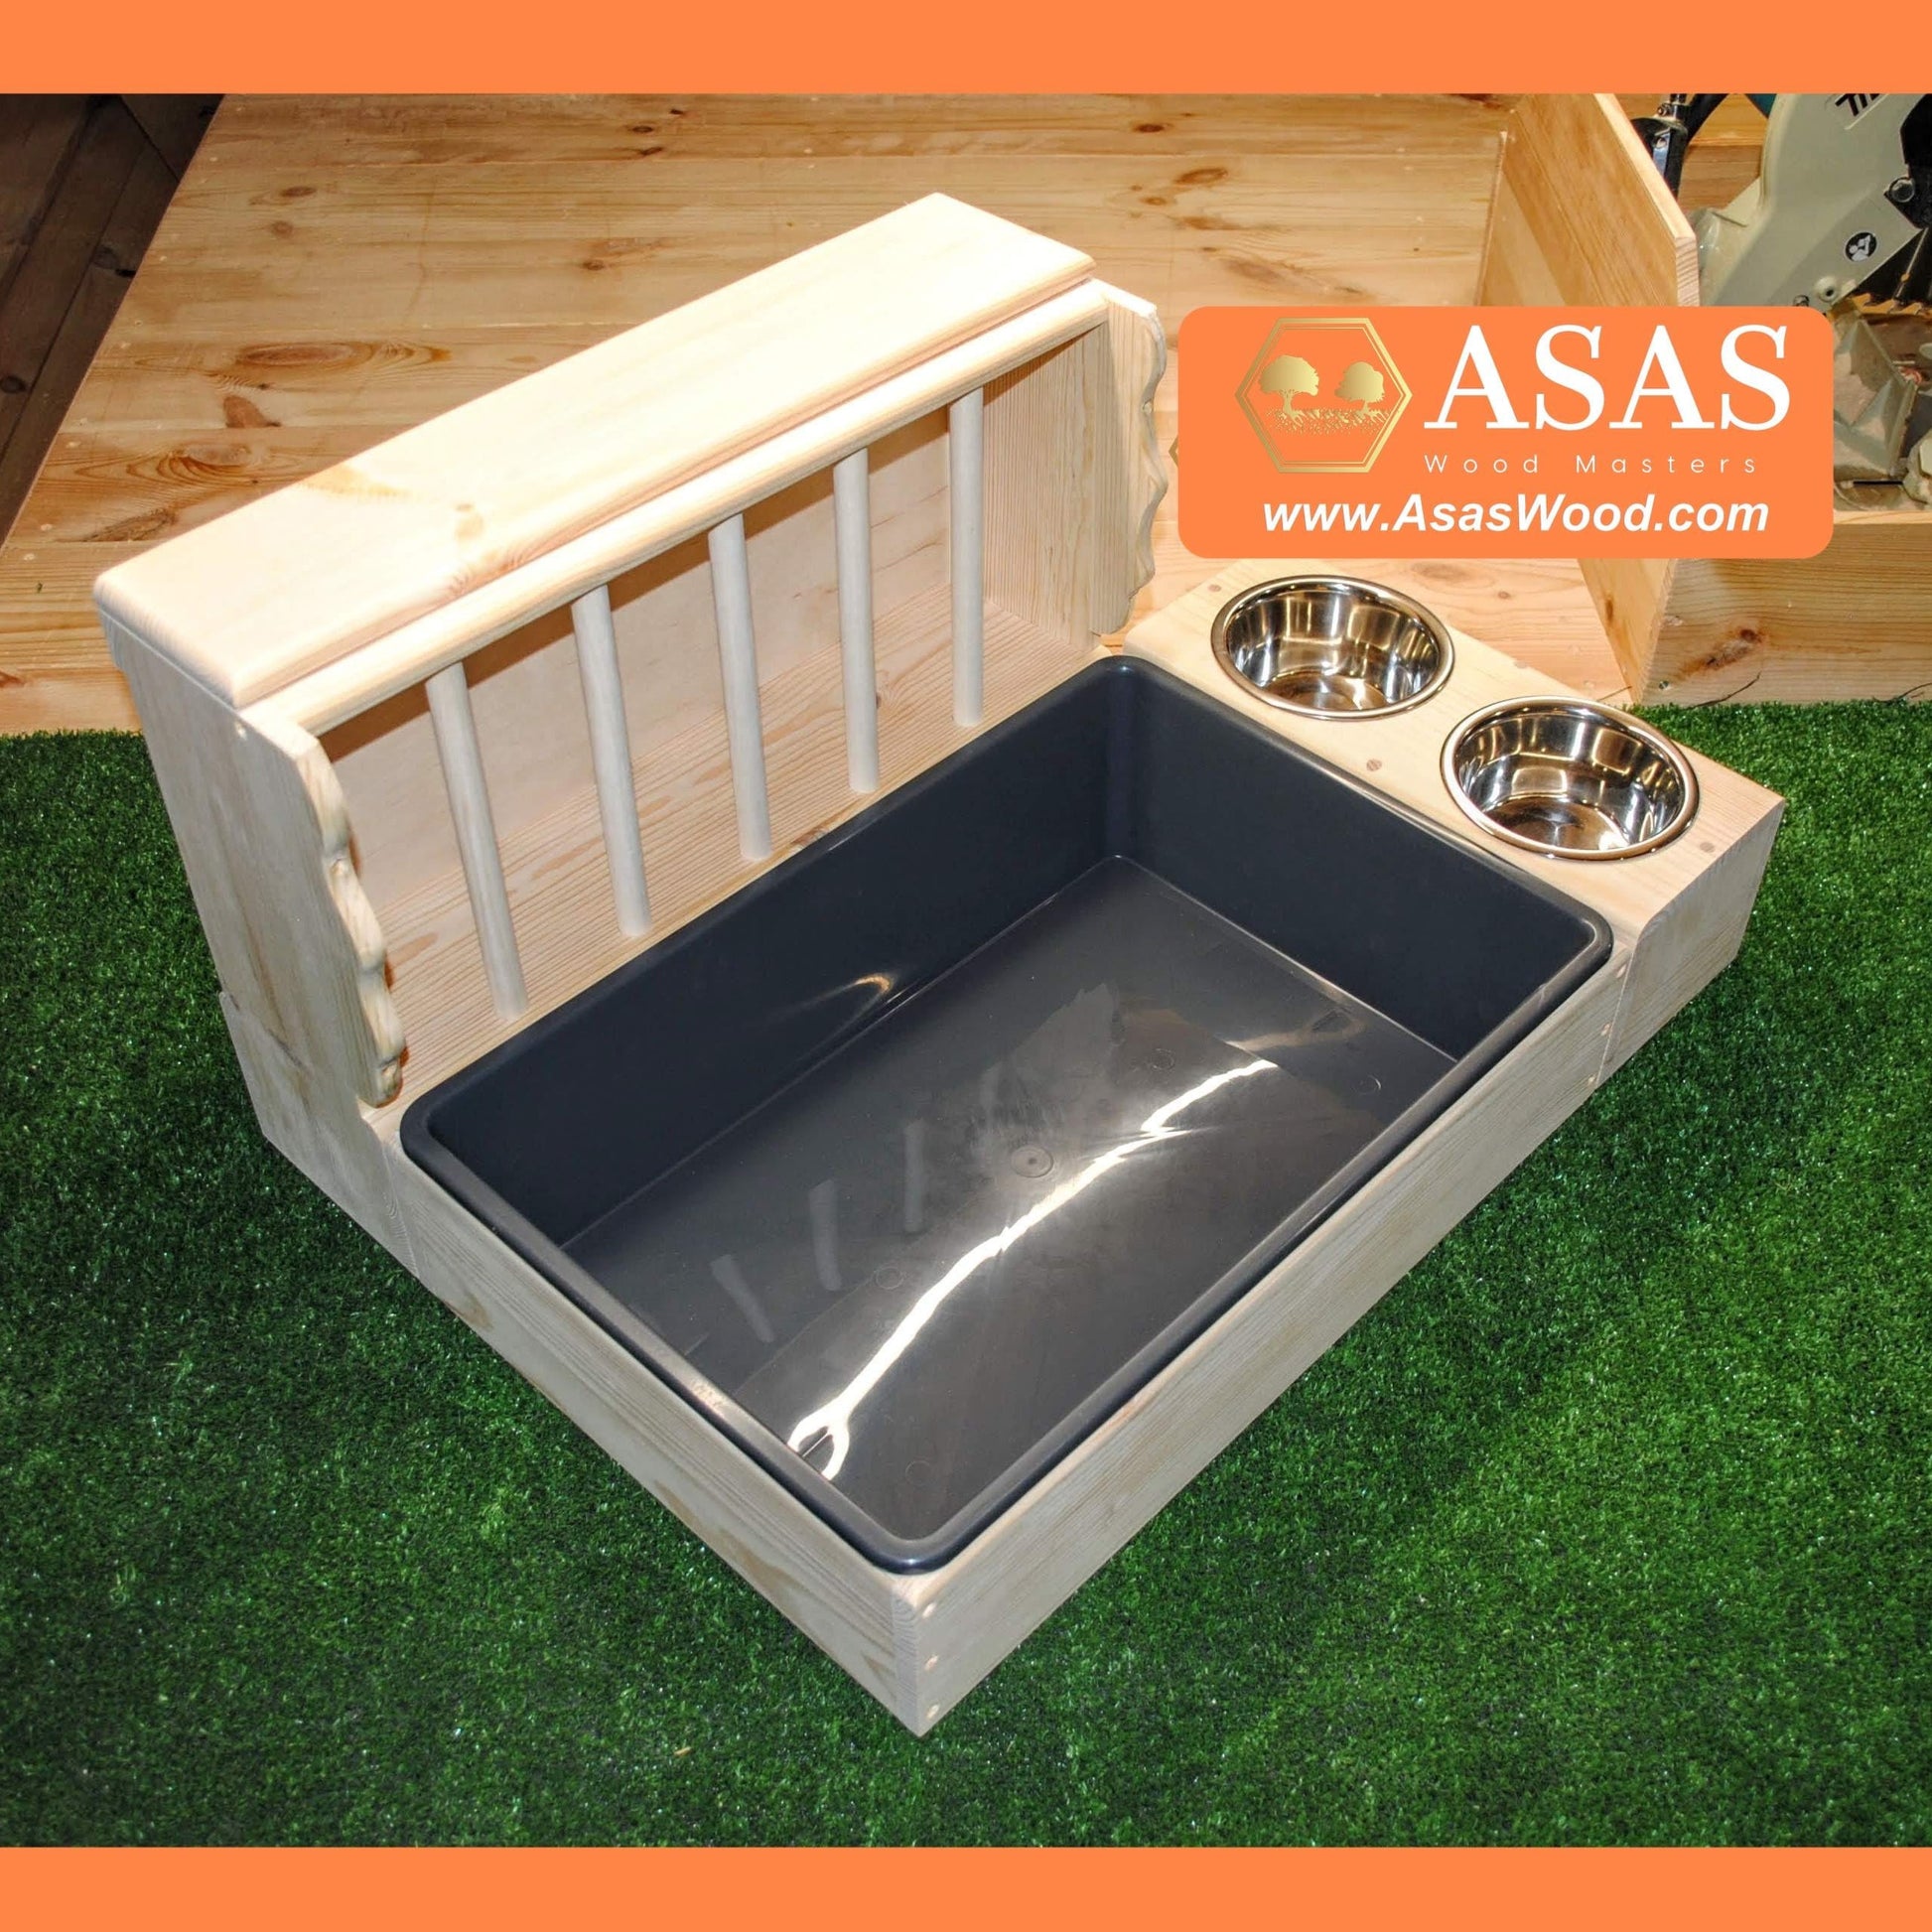 rabbit hay feeder with litter box and dish station, wire mesh insert in the litter box, made by asaswood